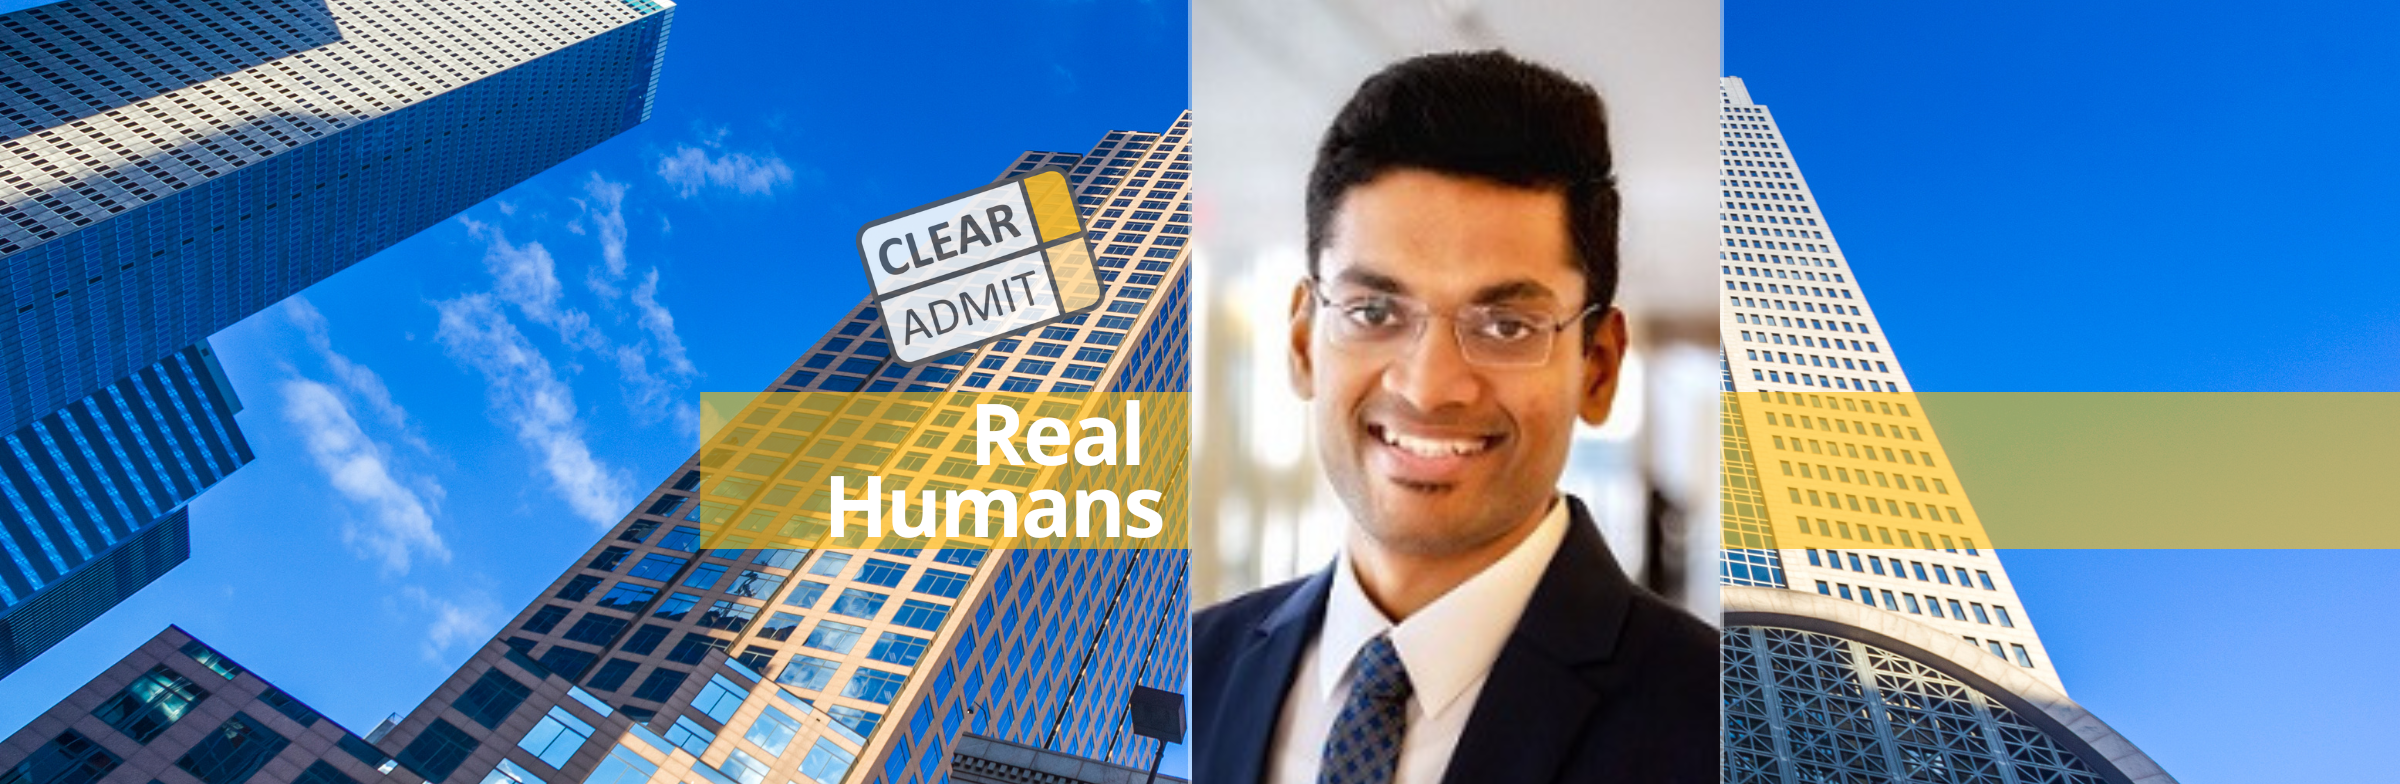 Image for Real Humans of McKinsey & Company: Dushyanth Nutulapati, Michigan Ross MBA ’21, Associate